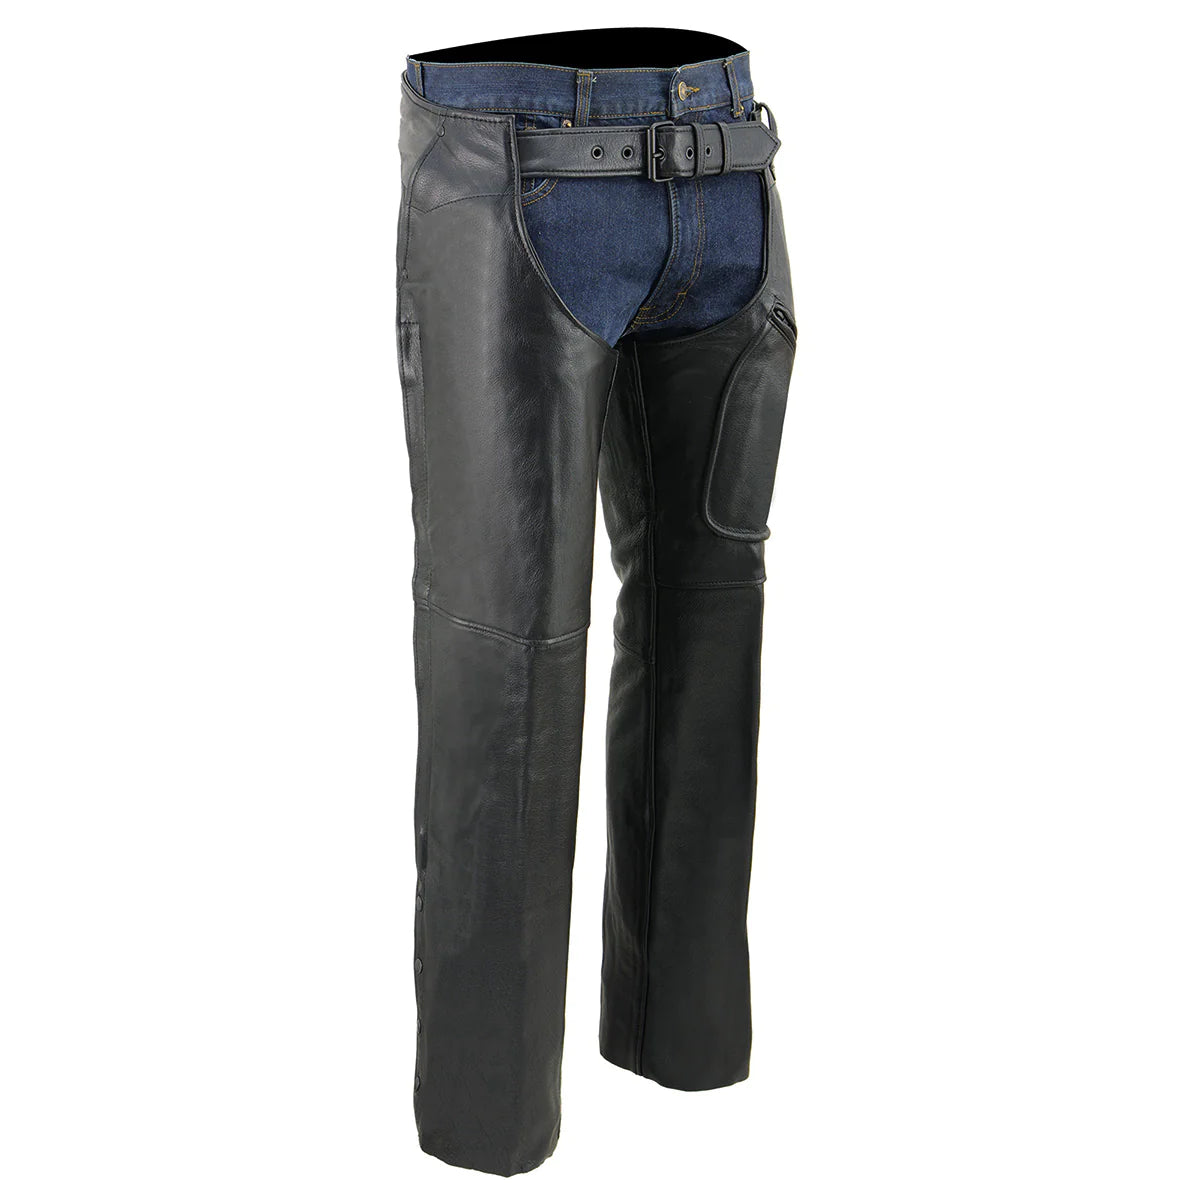 Men's Black Leather 3 Pocket Chaps with Thigh Patch Pocket